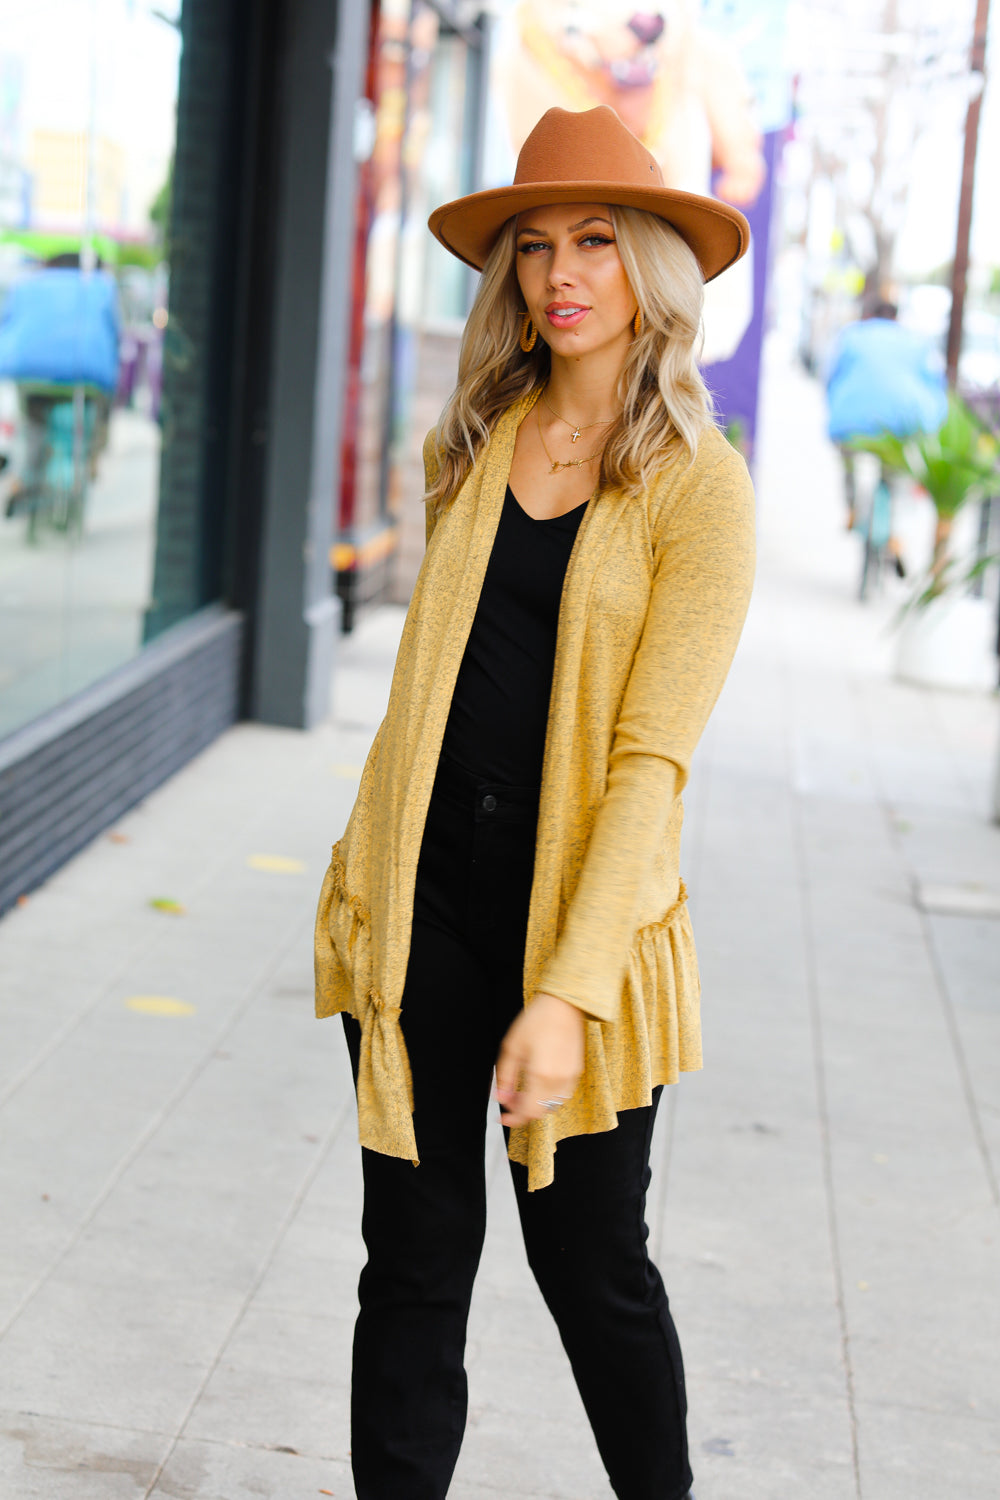 Face the Day Mustard Two-Tone Ruffle Cardigan - Sybaritic Bags & Clothing